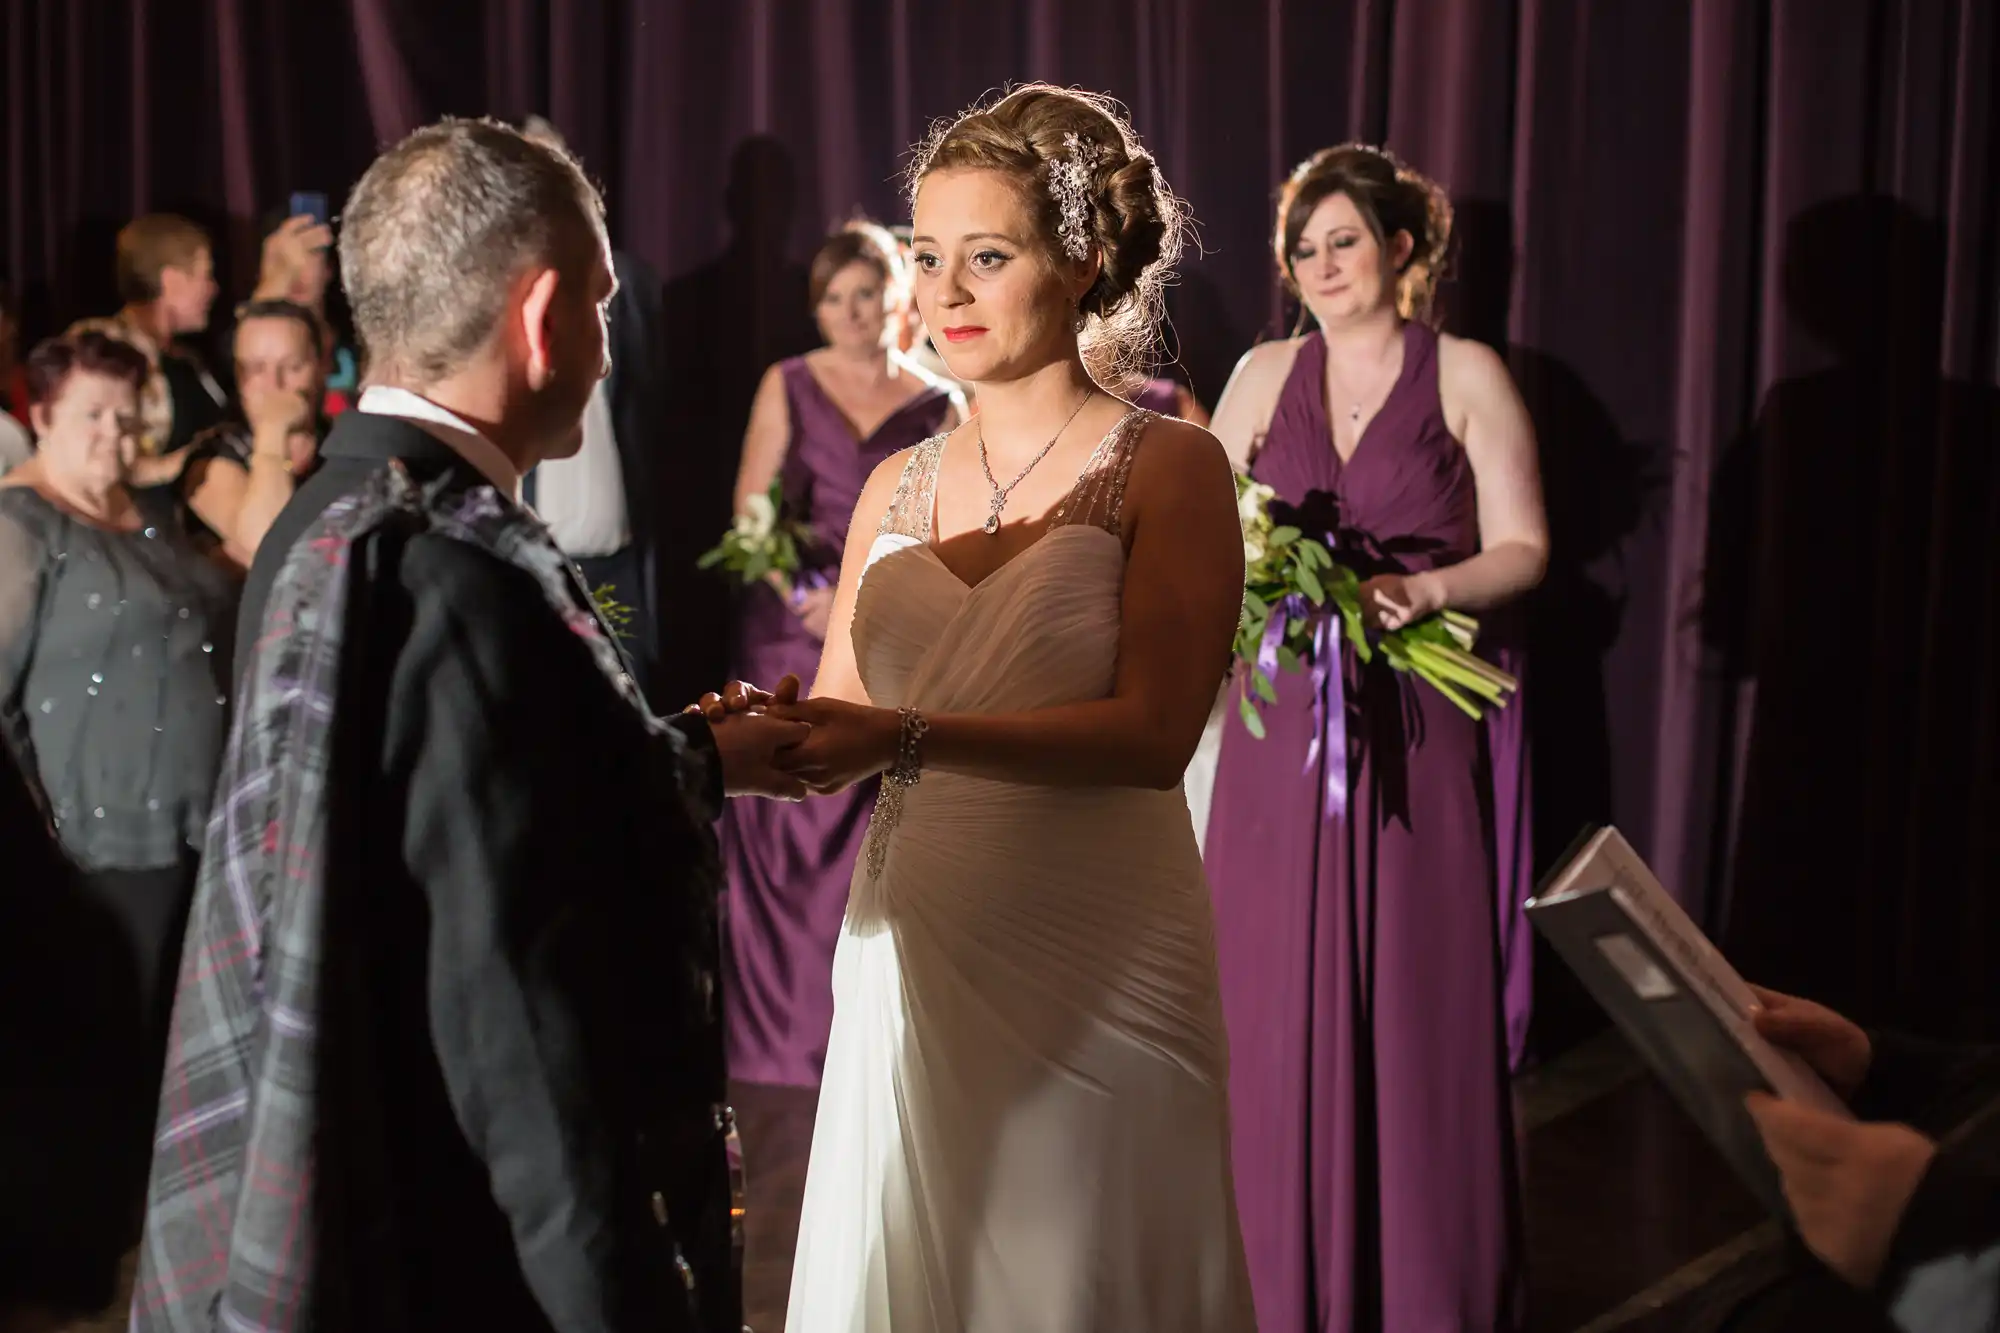 Bride in a strapless gown and groom in a tartan kilt exchange rings during a ceremony, with bridesmaids in purple dresses and guests in the background.